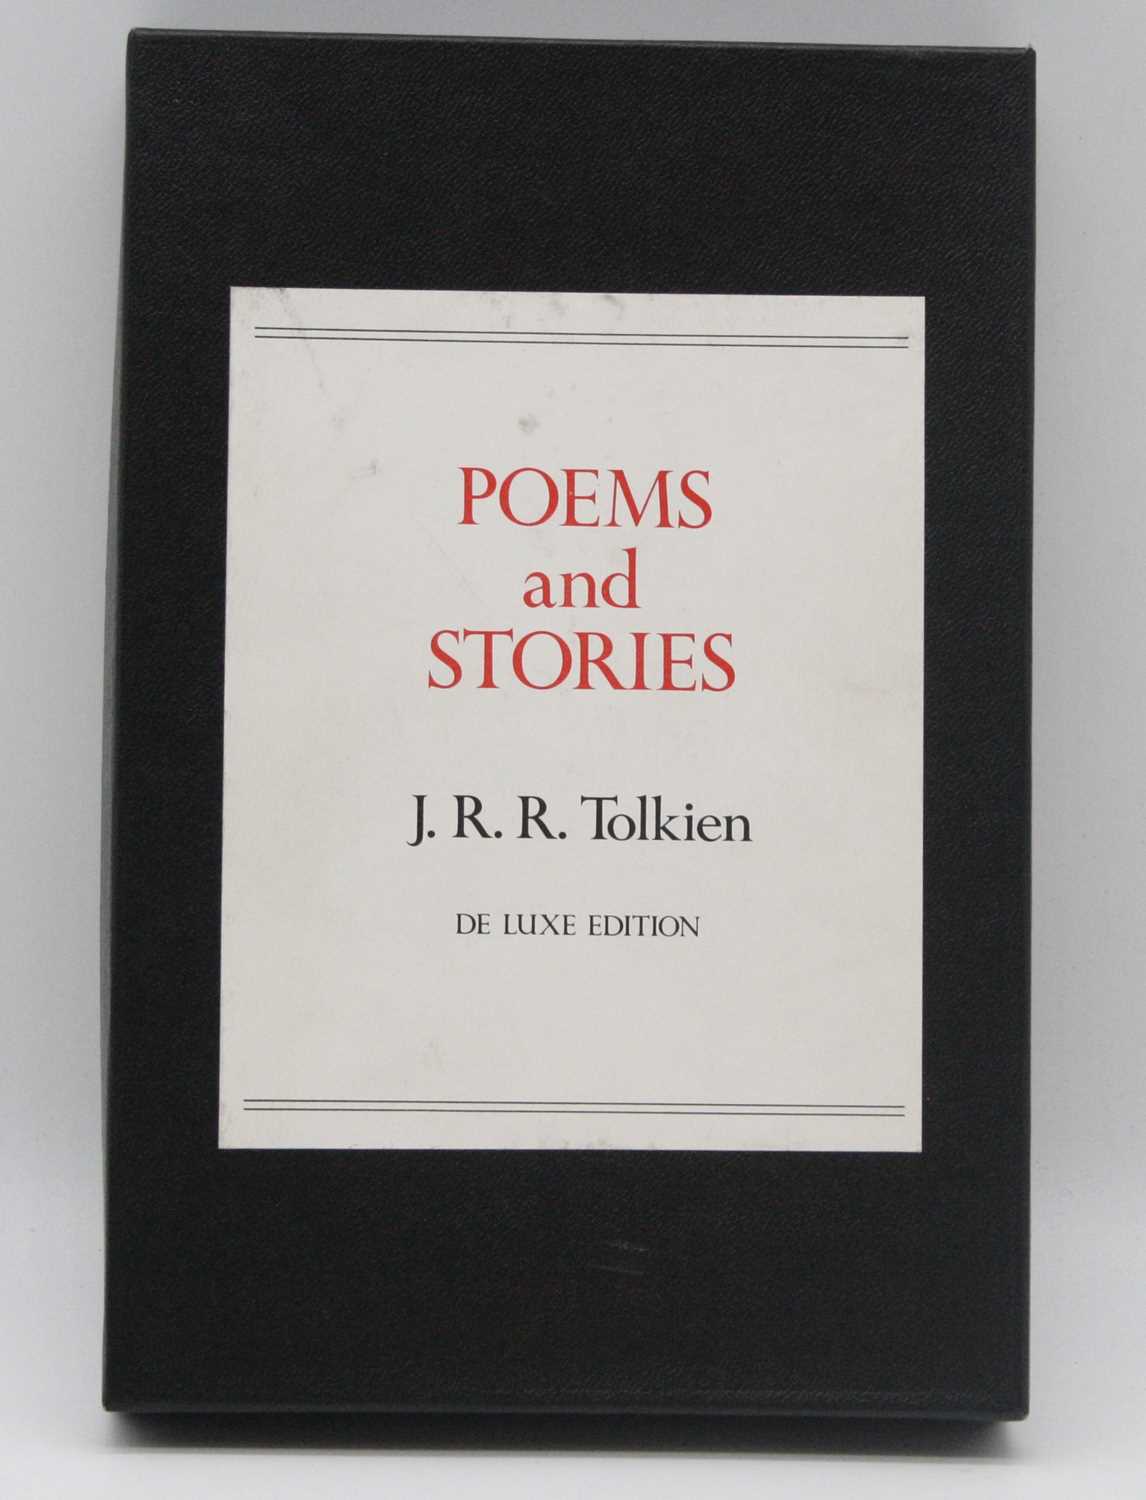 Tolkien, J.R.R.: Poems and Stories De Luxe Edition, George Allen and Unwin, 1980, in slipcase. (1)